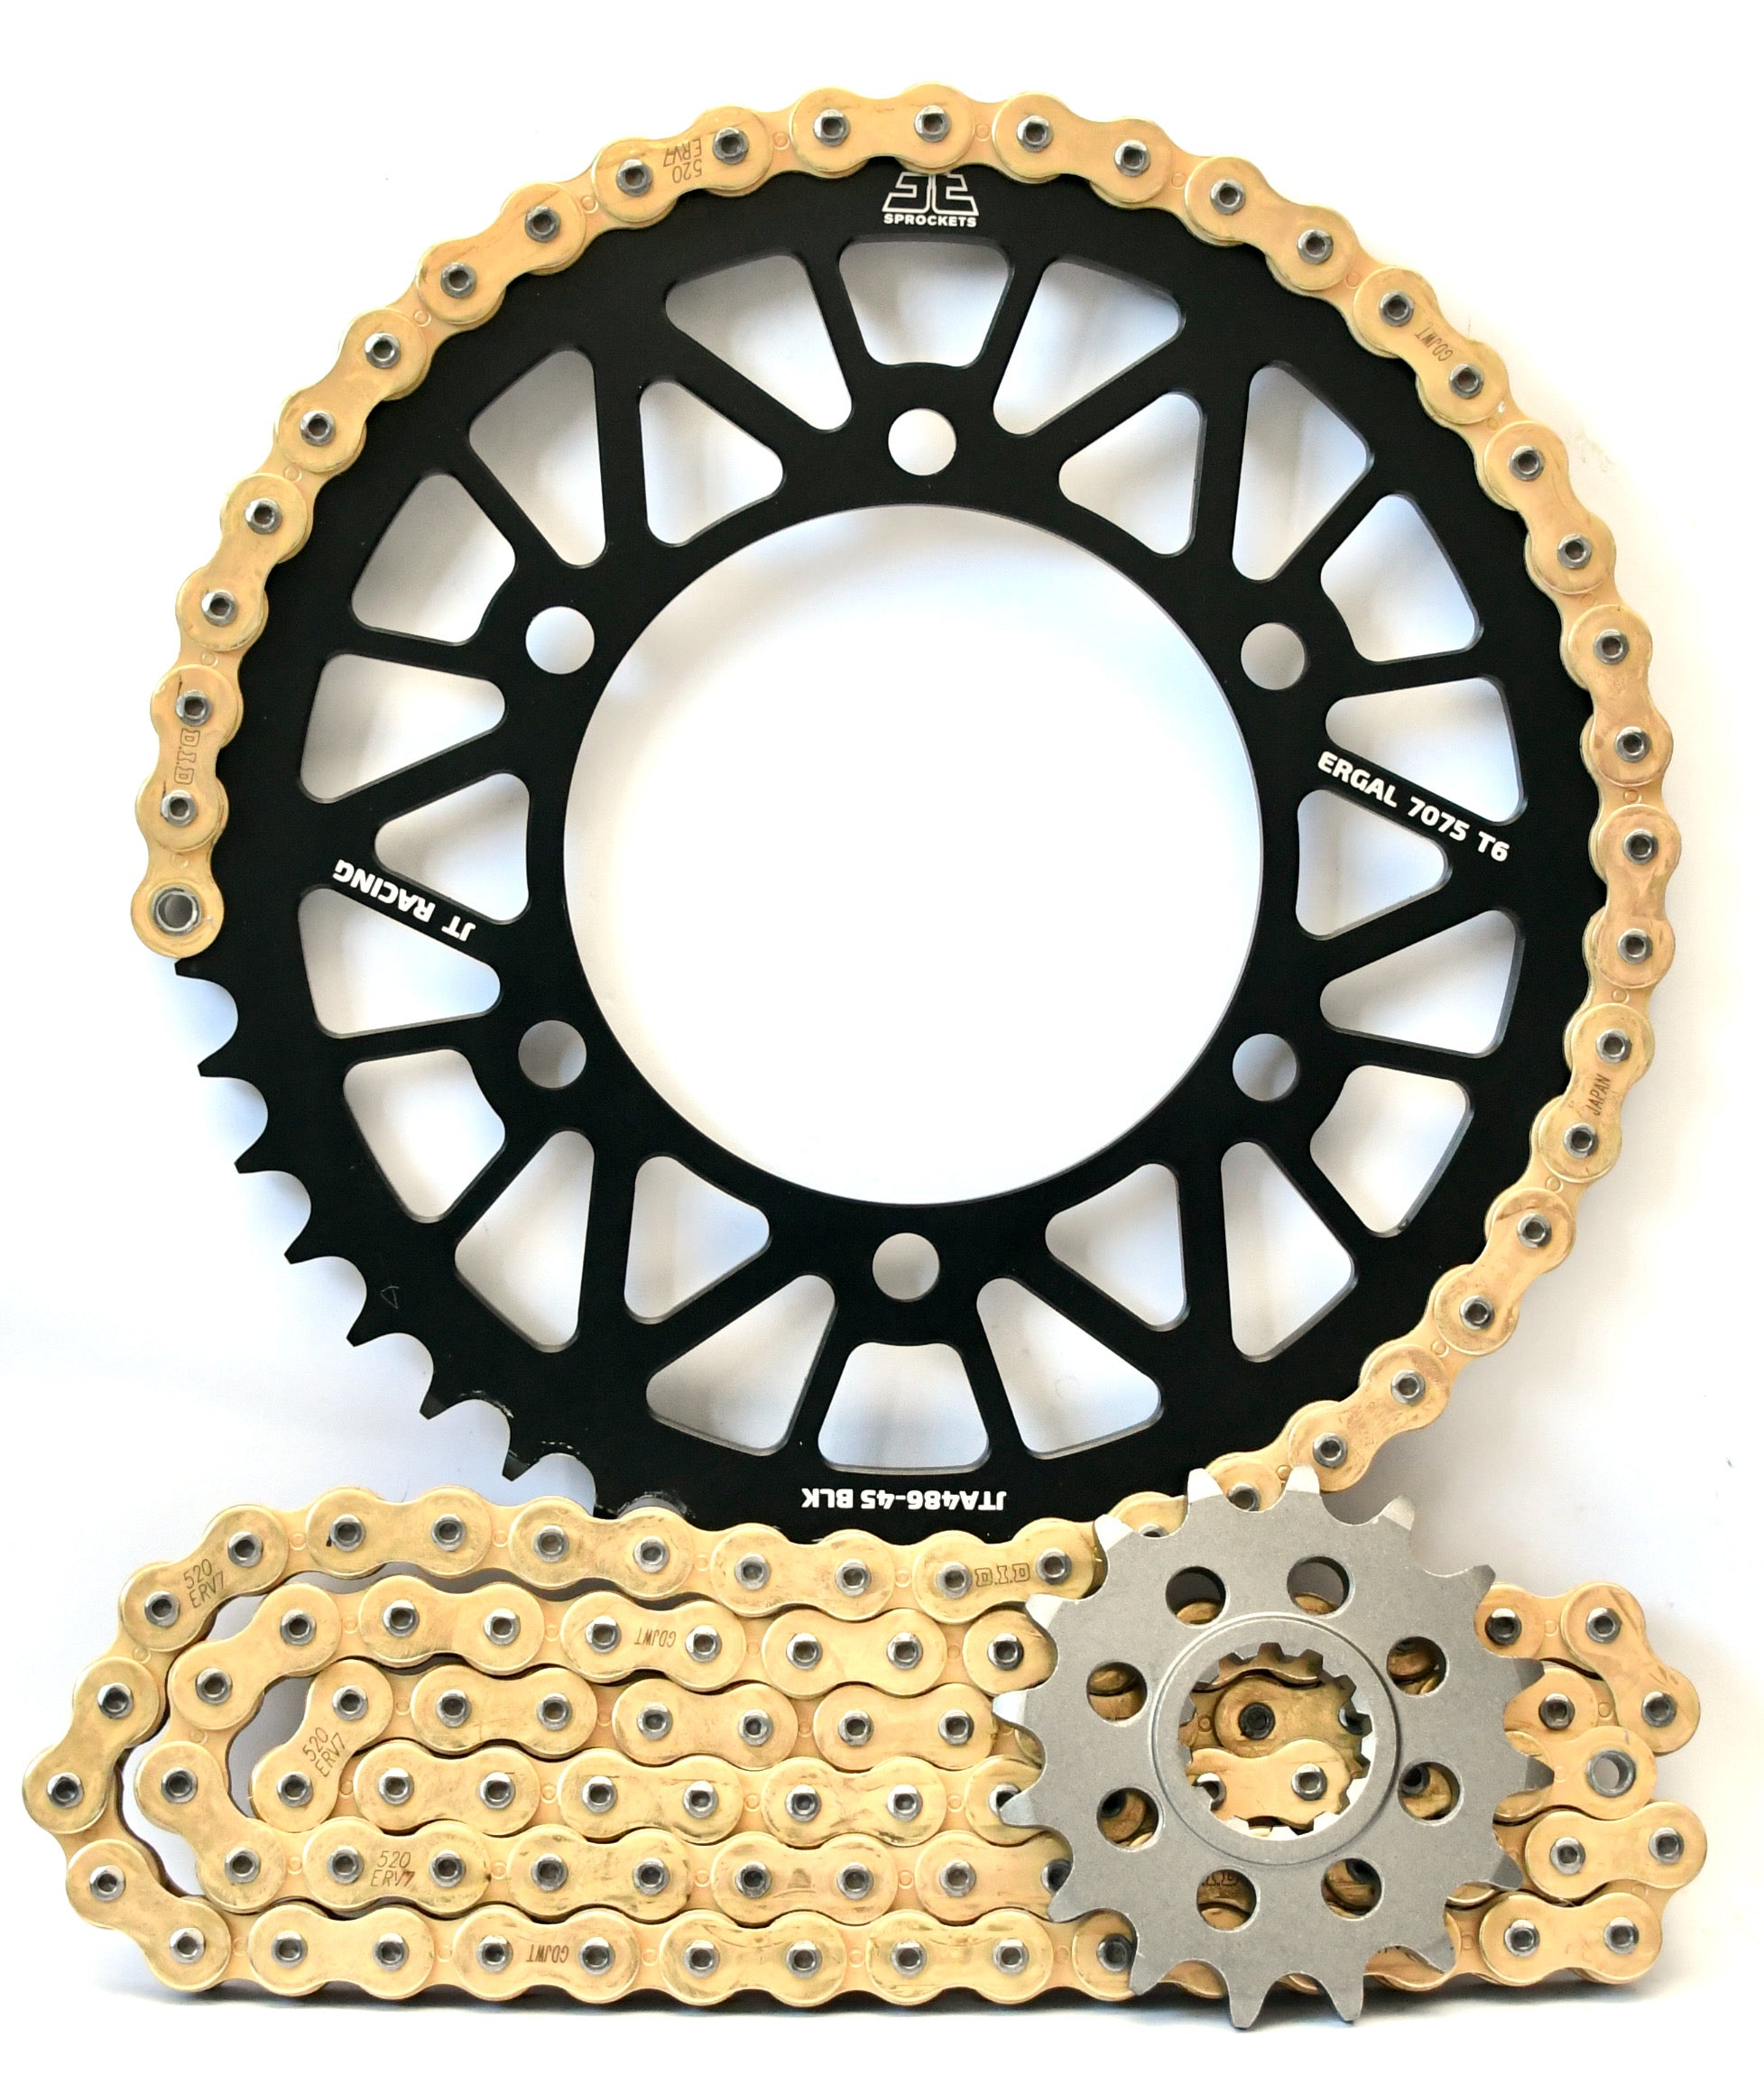 JT Racelite and DID 520 Conversion Chain & Sprocket Kit for Yamaha R1 1998-2003 - Standard Gearing